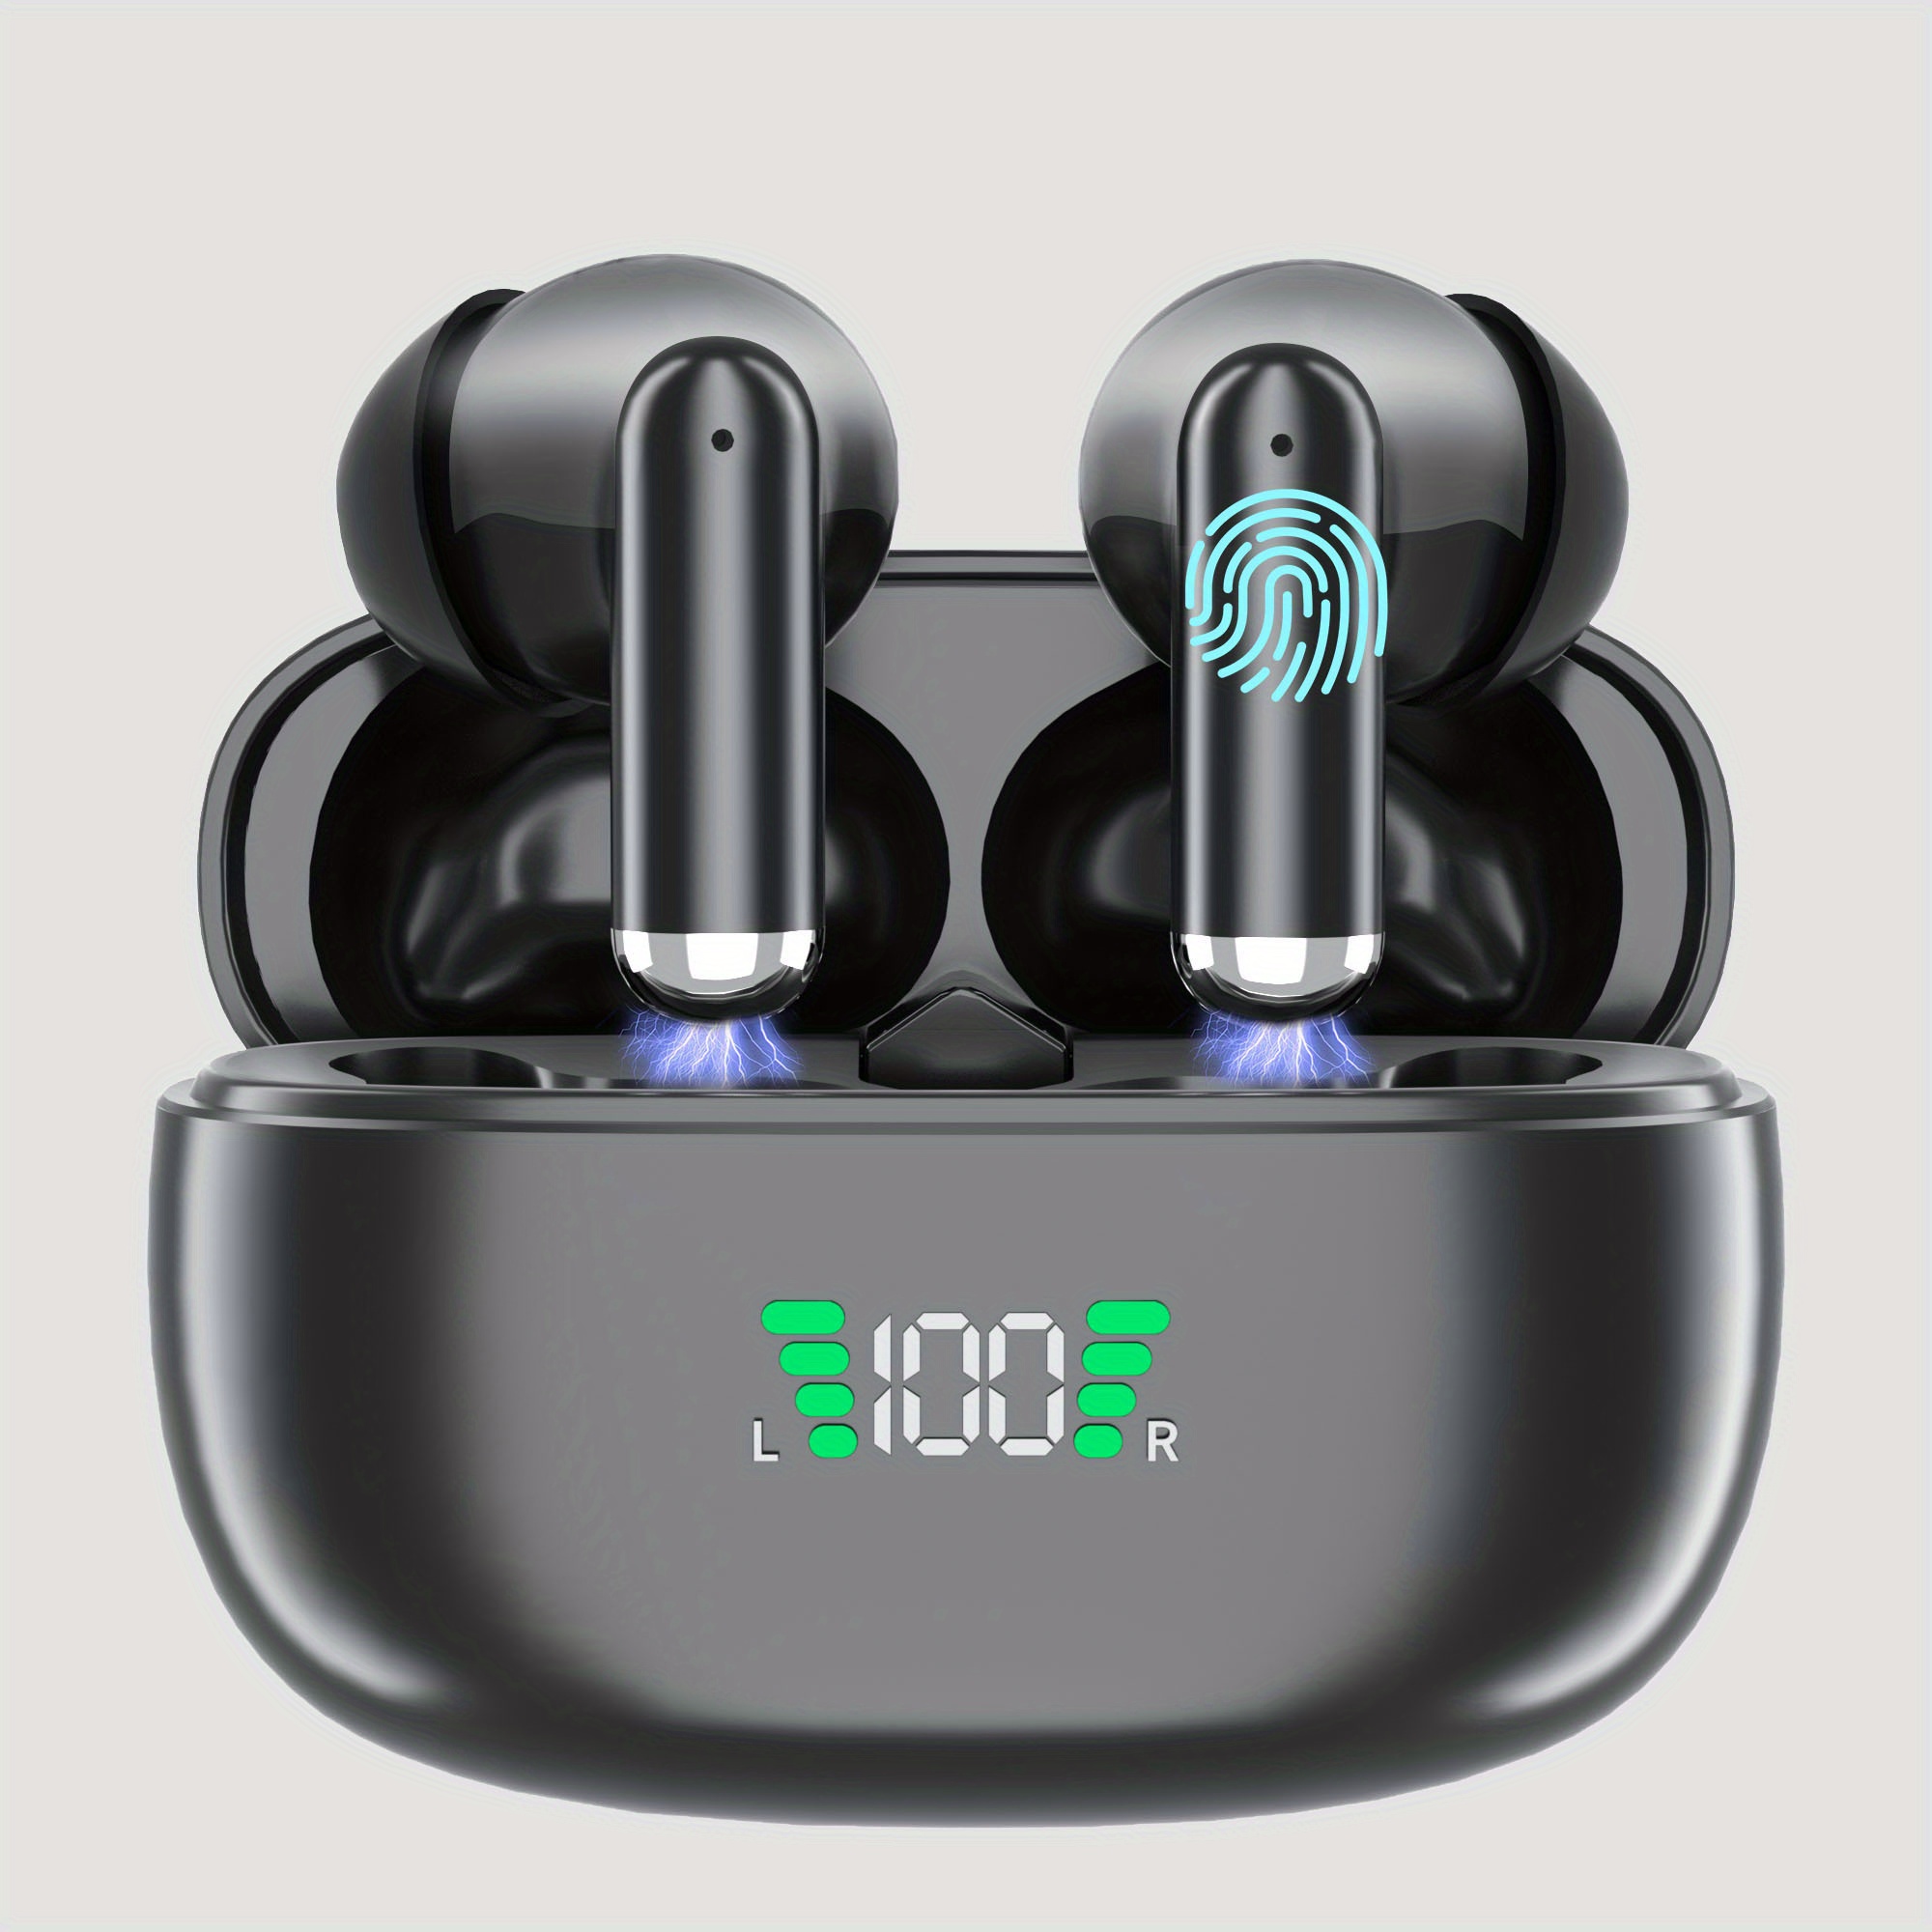 

Wireless5.3 Earbuds, Tws Stereo Earphones, Sport Headset, Touch Control In Ear Headphones With Led Digital Display Charging Case